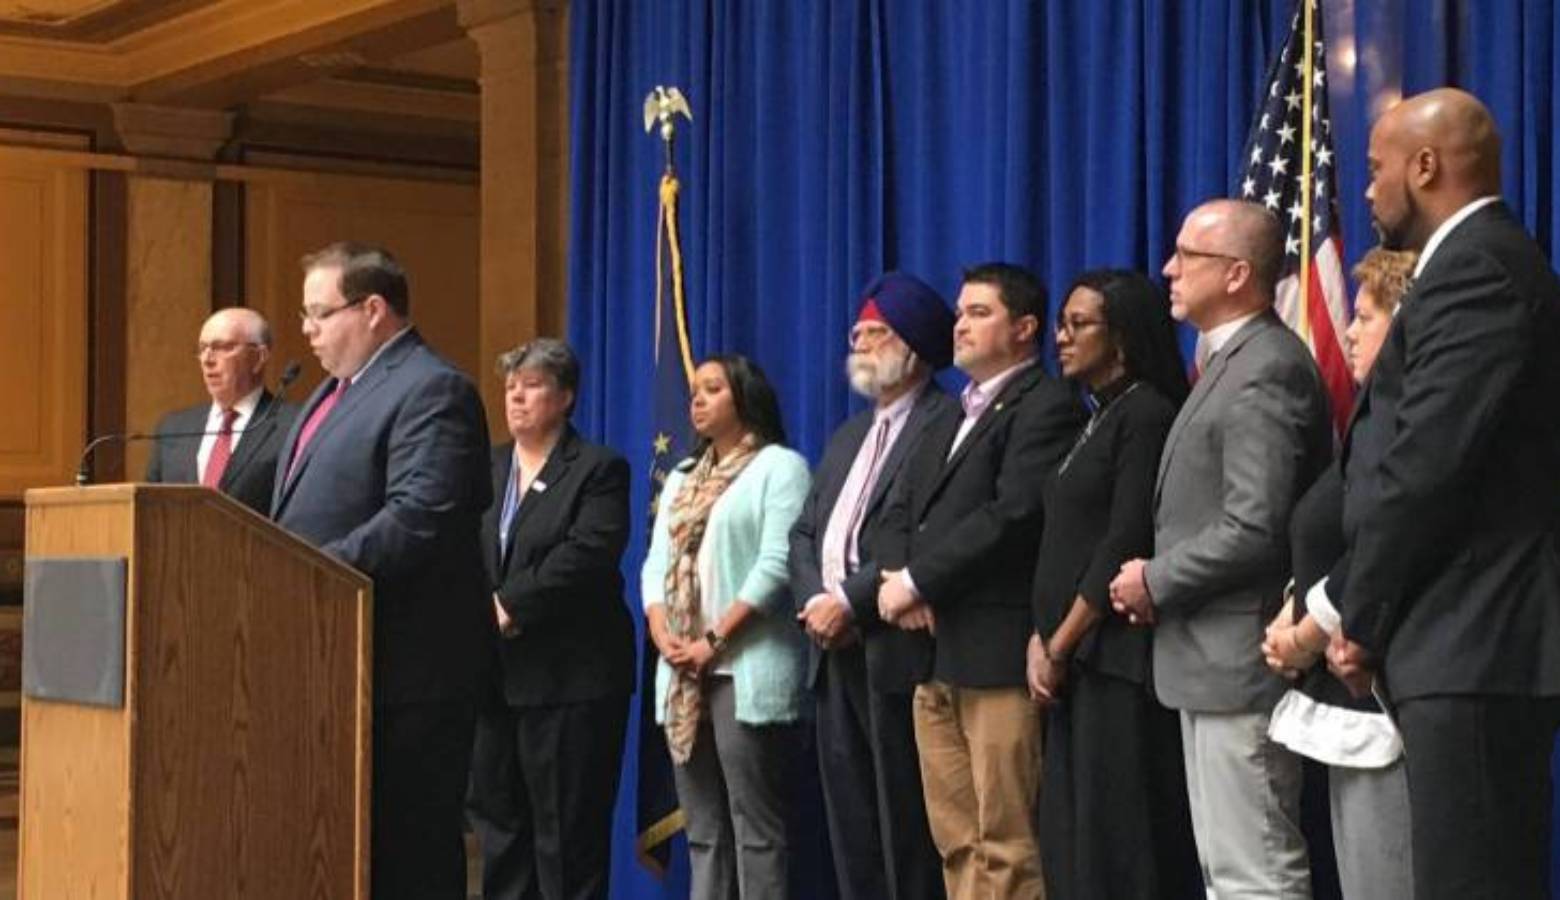 Flanked by a group of faith and community leaders, David Sklar of the Jewish Community Relations Council spoke Wednesday, March 15, 2017 at the Indiana Statehouse.